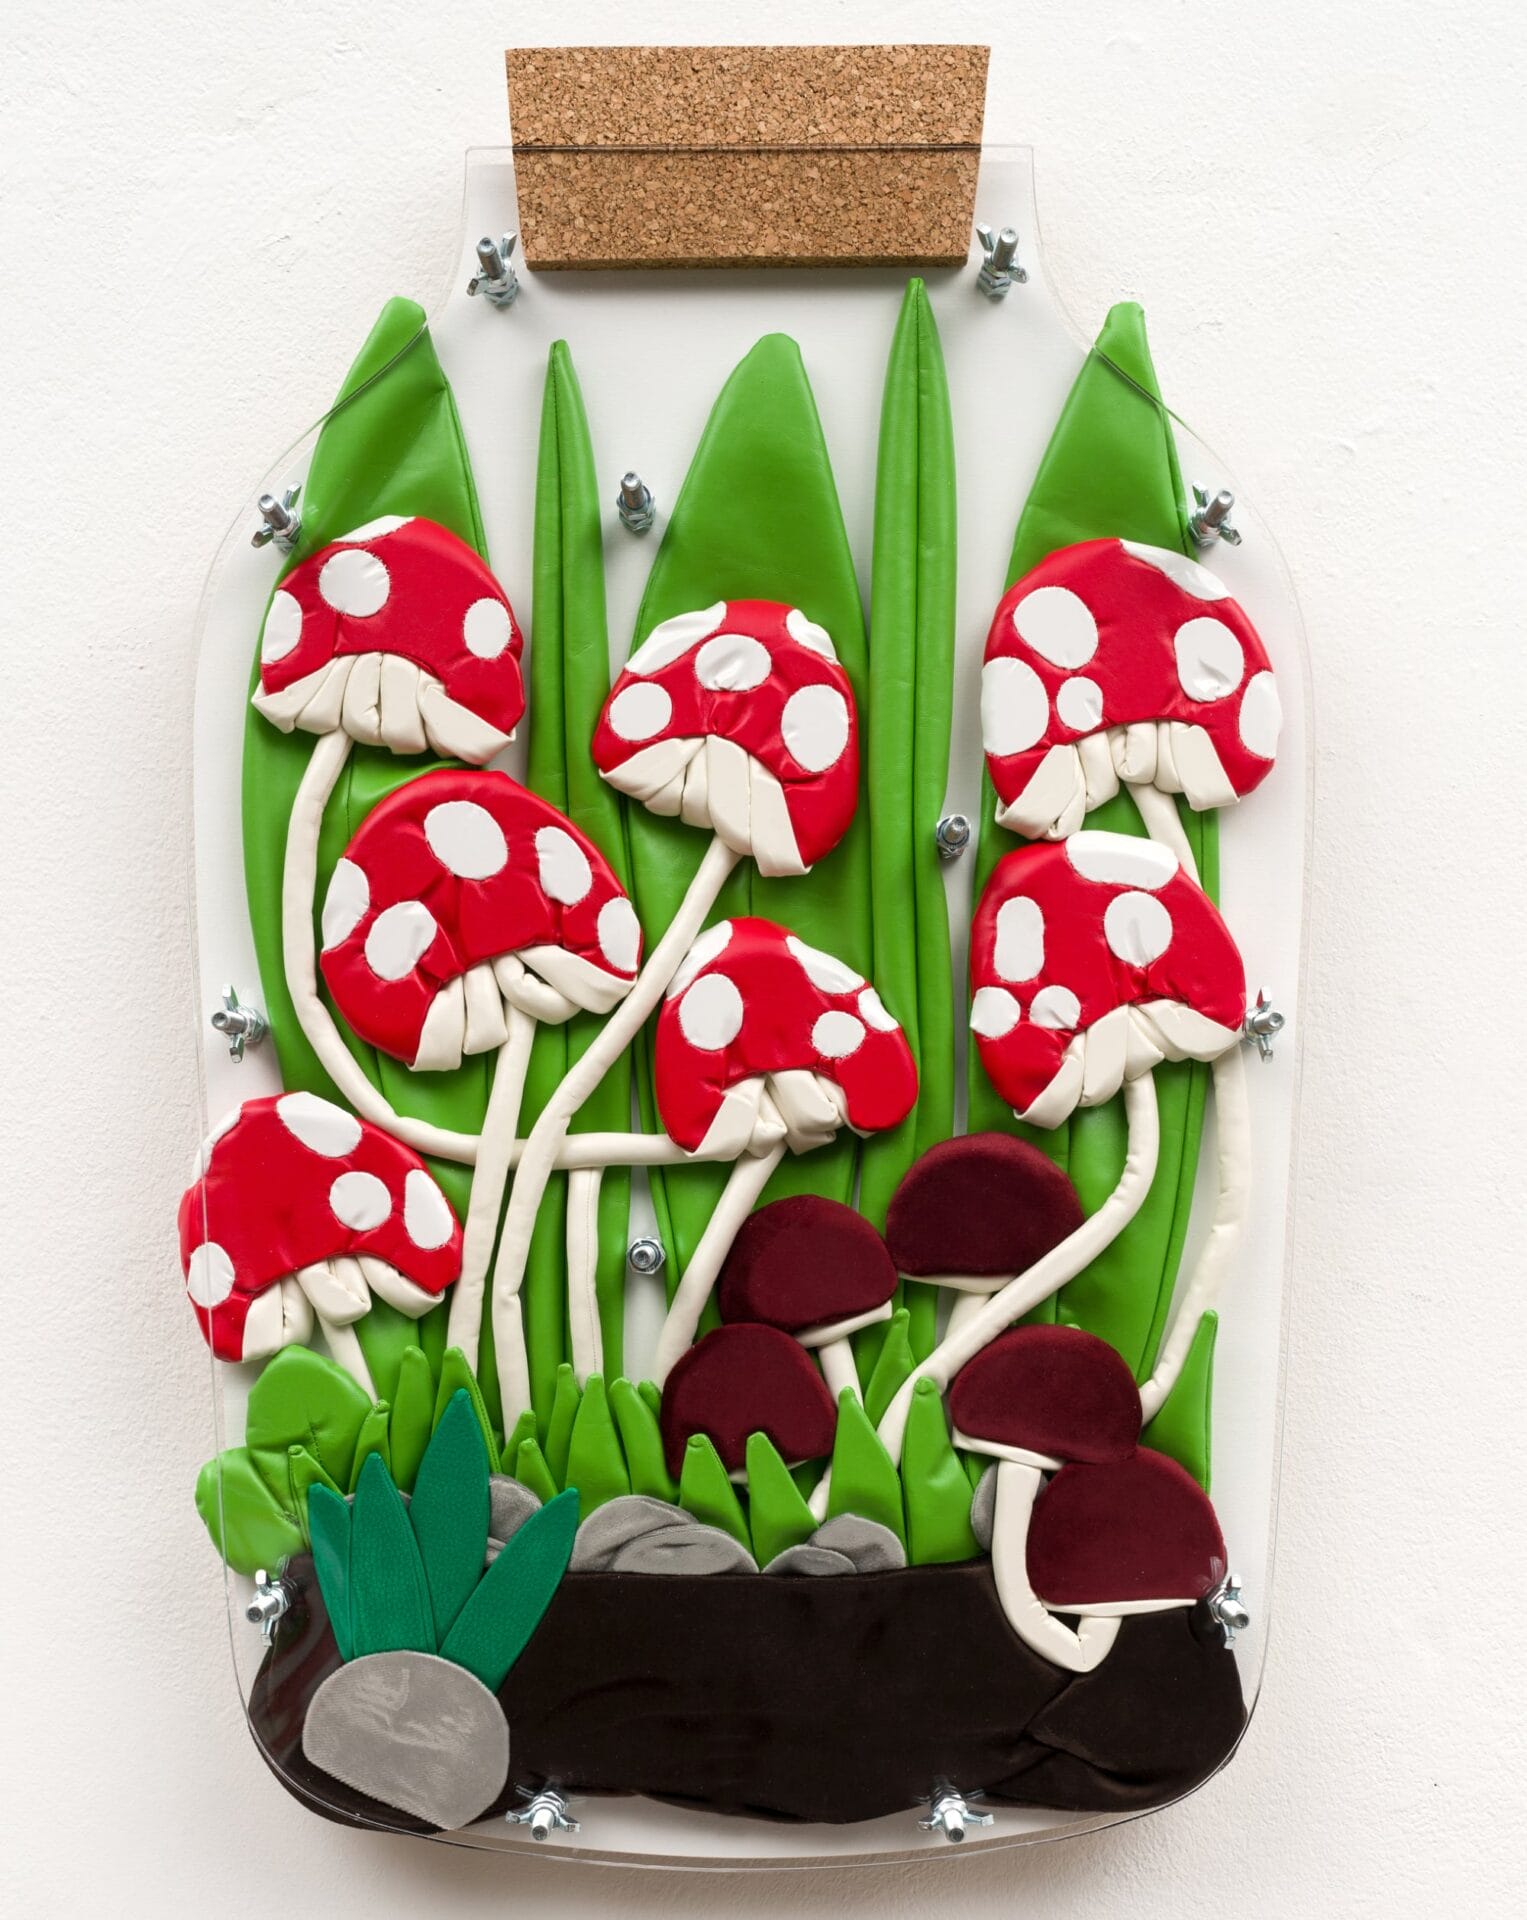 red and white spores sprout in a terrarium